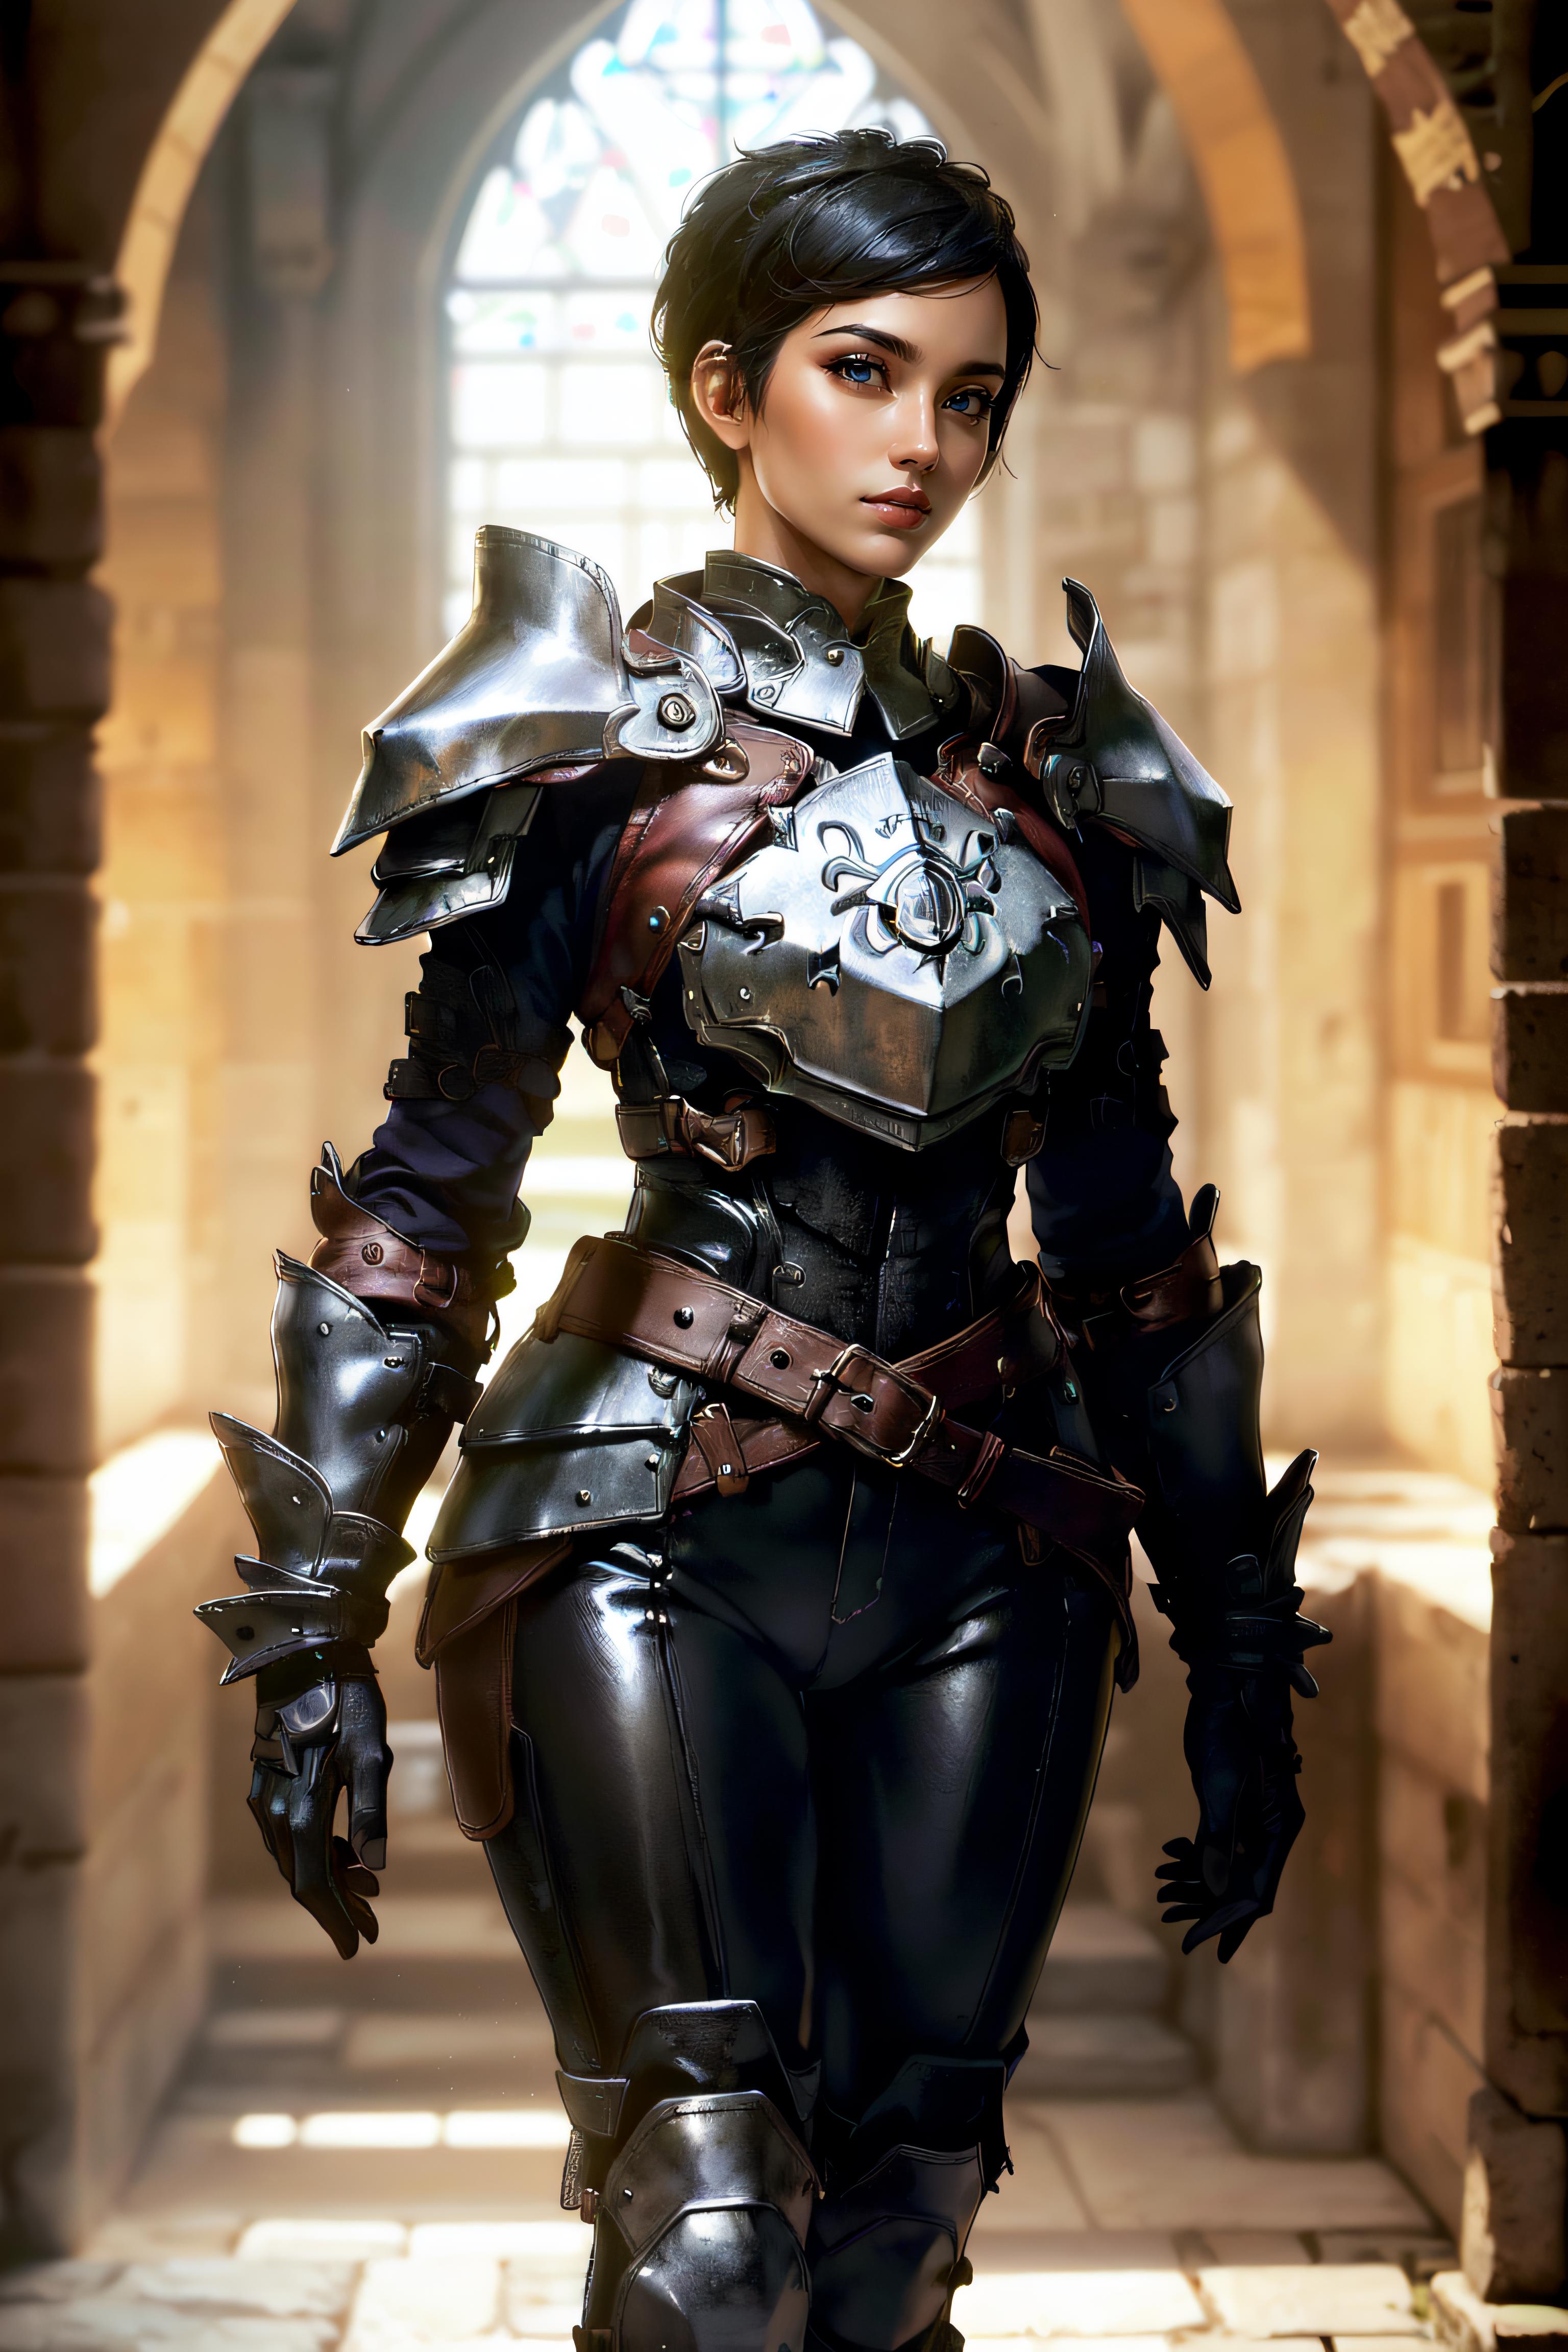 Cassandra from Dragon Age image by betweenspectrums